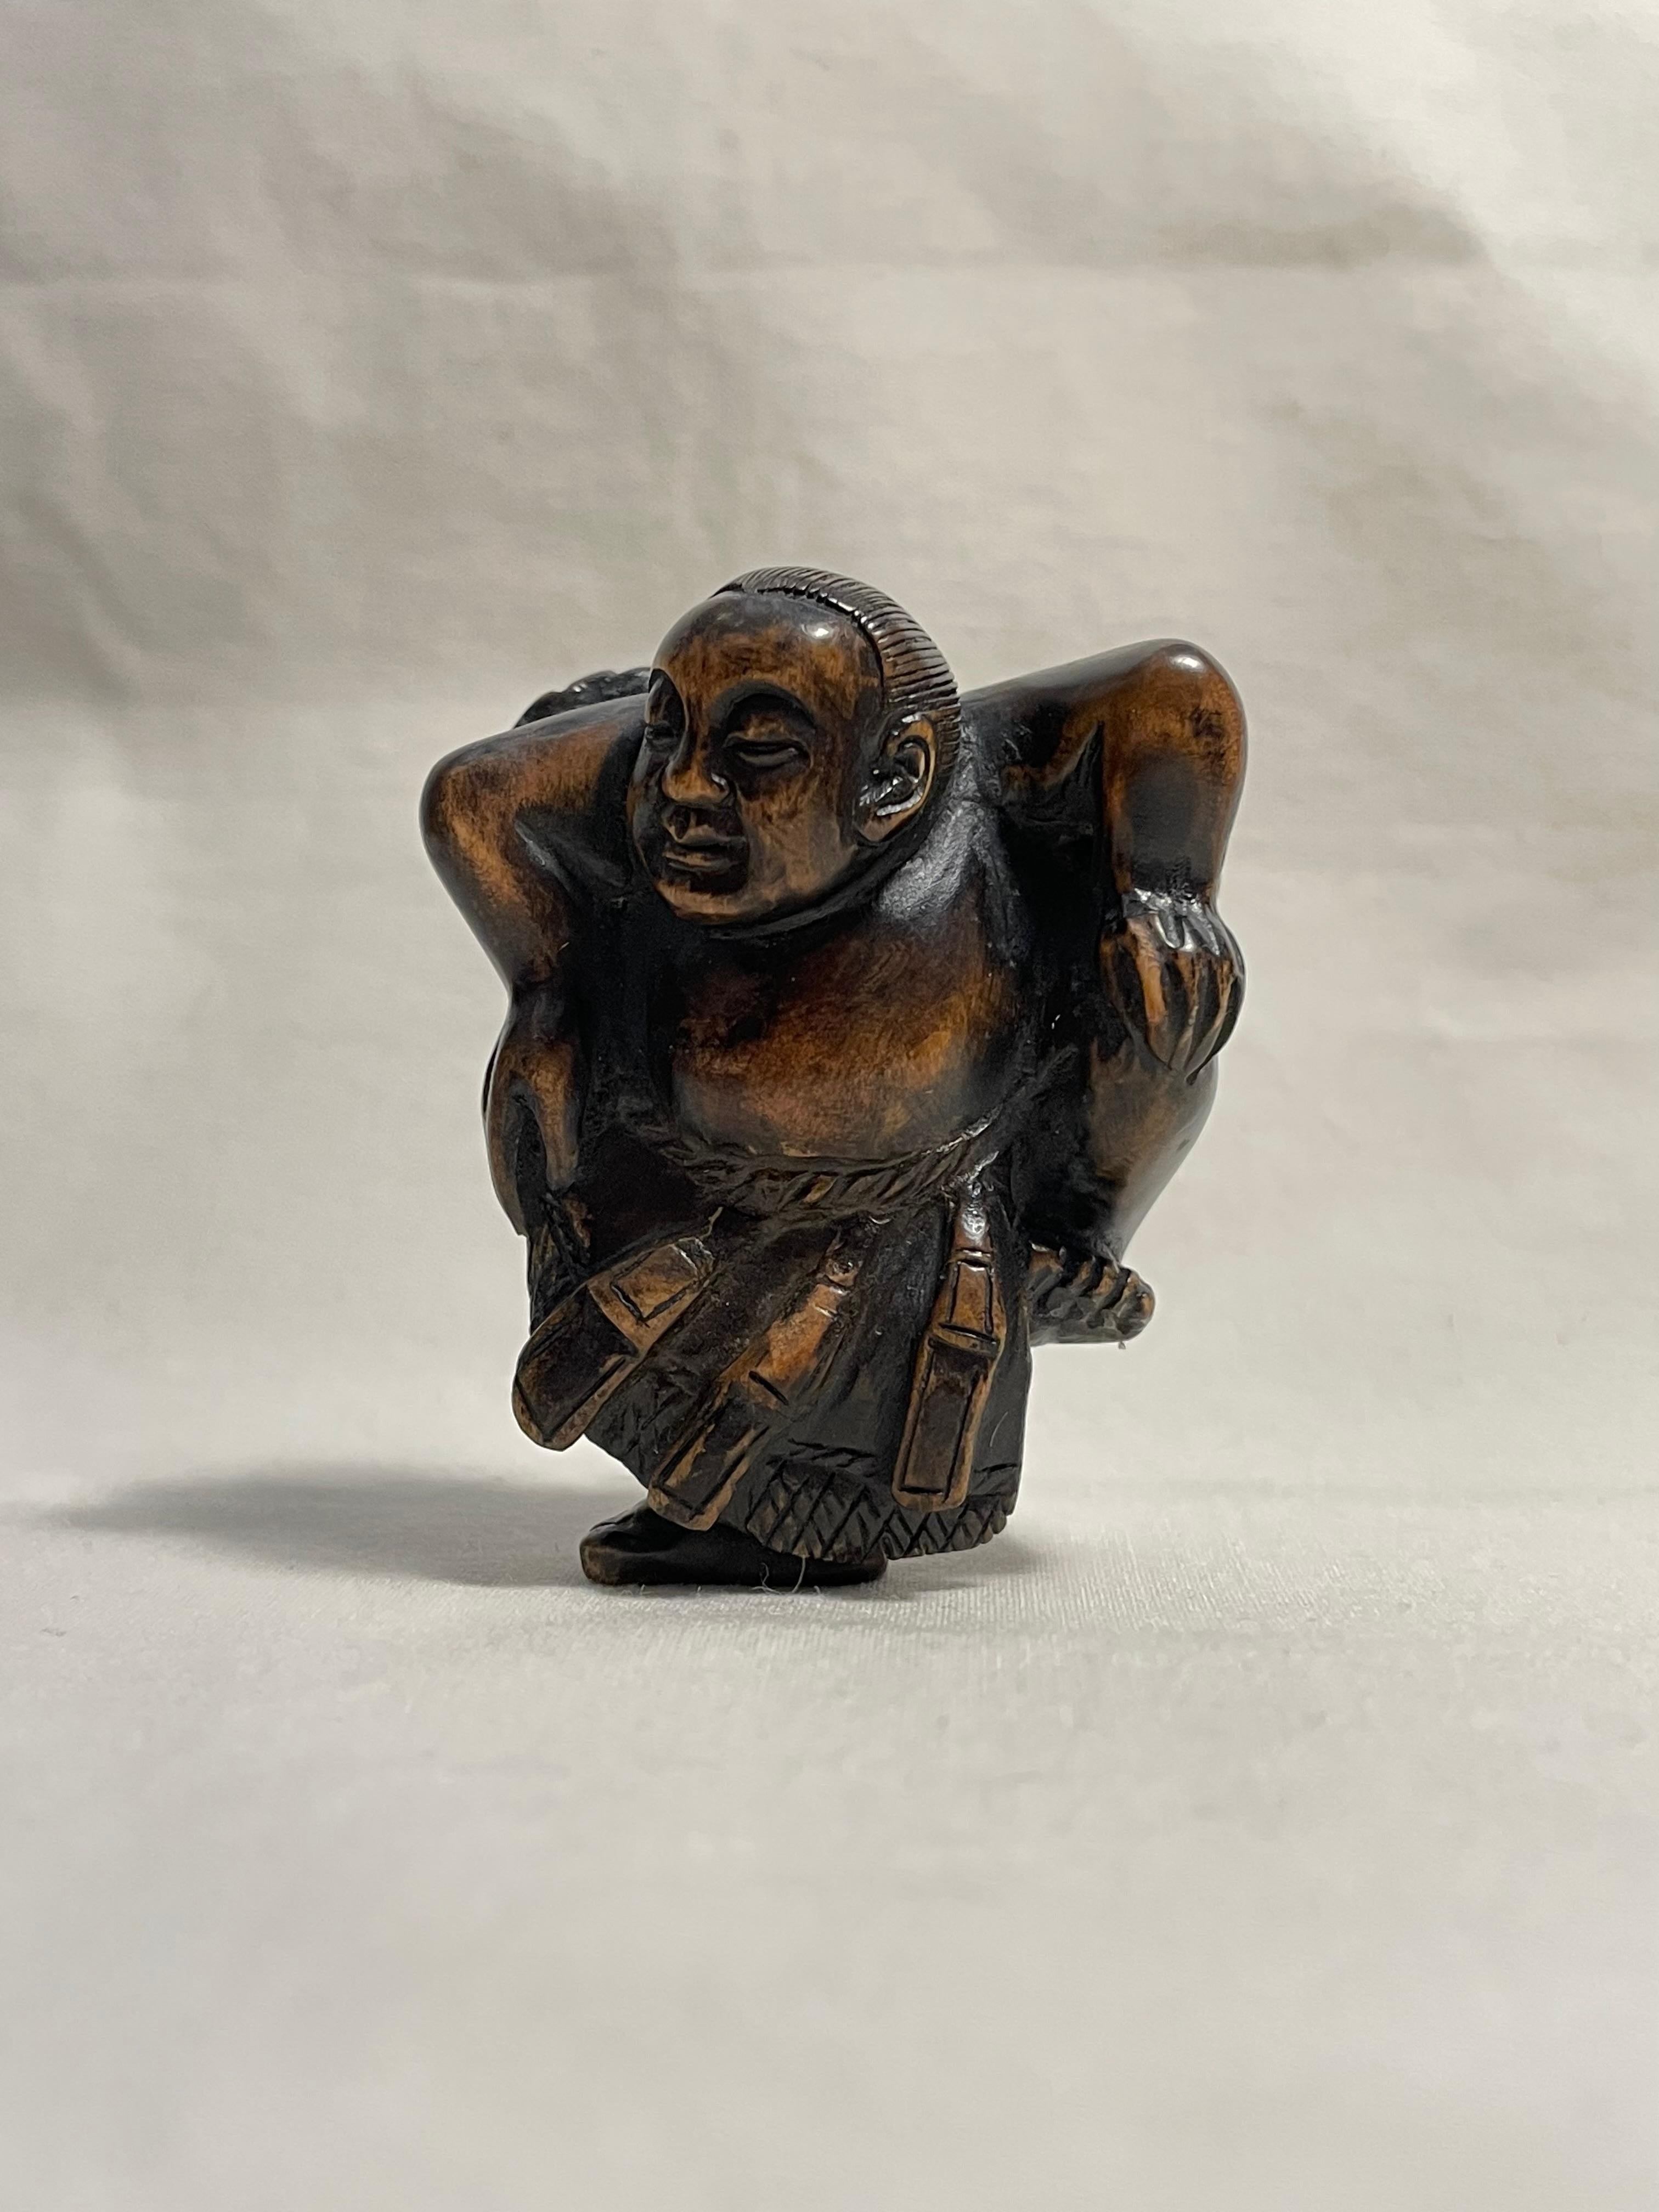 This is an antique netsuke made in Japan around meiji period 1900s.
This netsuke was made by a netsuke artist 'Hironaka' (you can see his signature on the right feet of this sumo wrestler.)
Netsuke is a miniature sculpture, originating in 17th